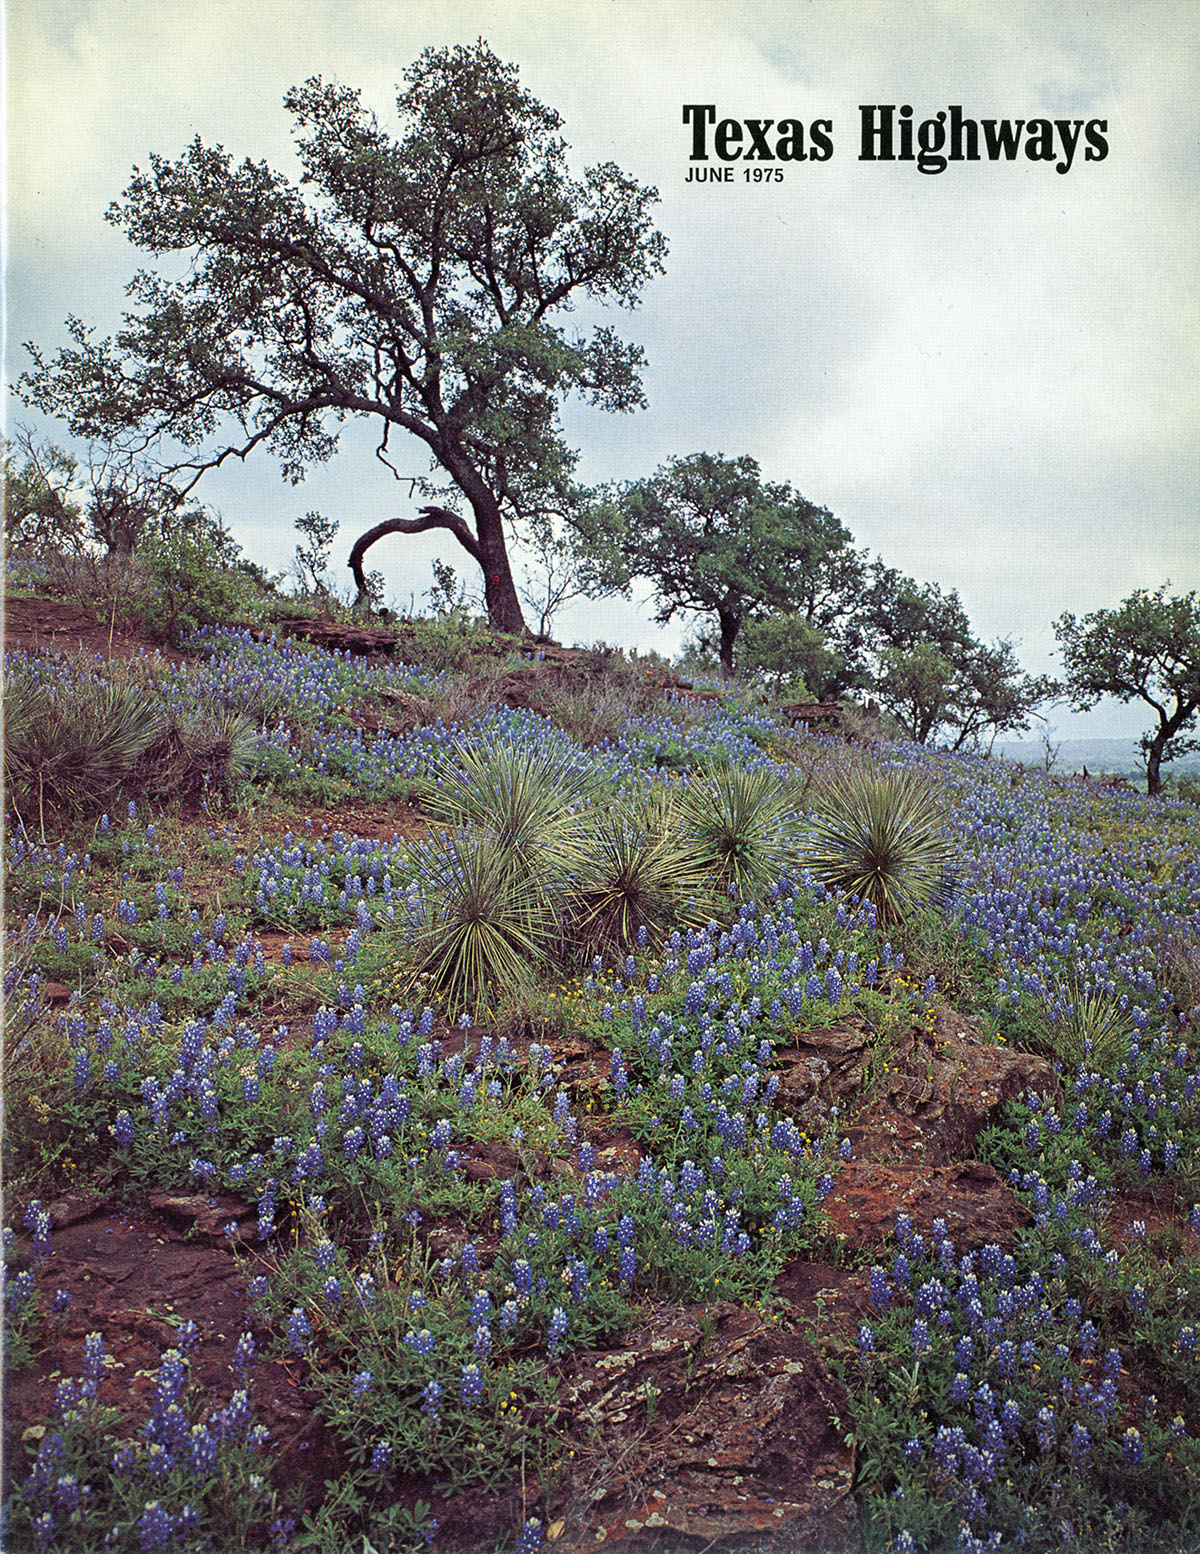 A cover of Texas Highways featuring a field of bluebonnets